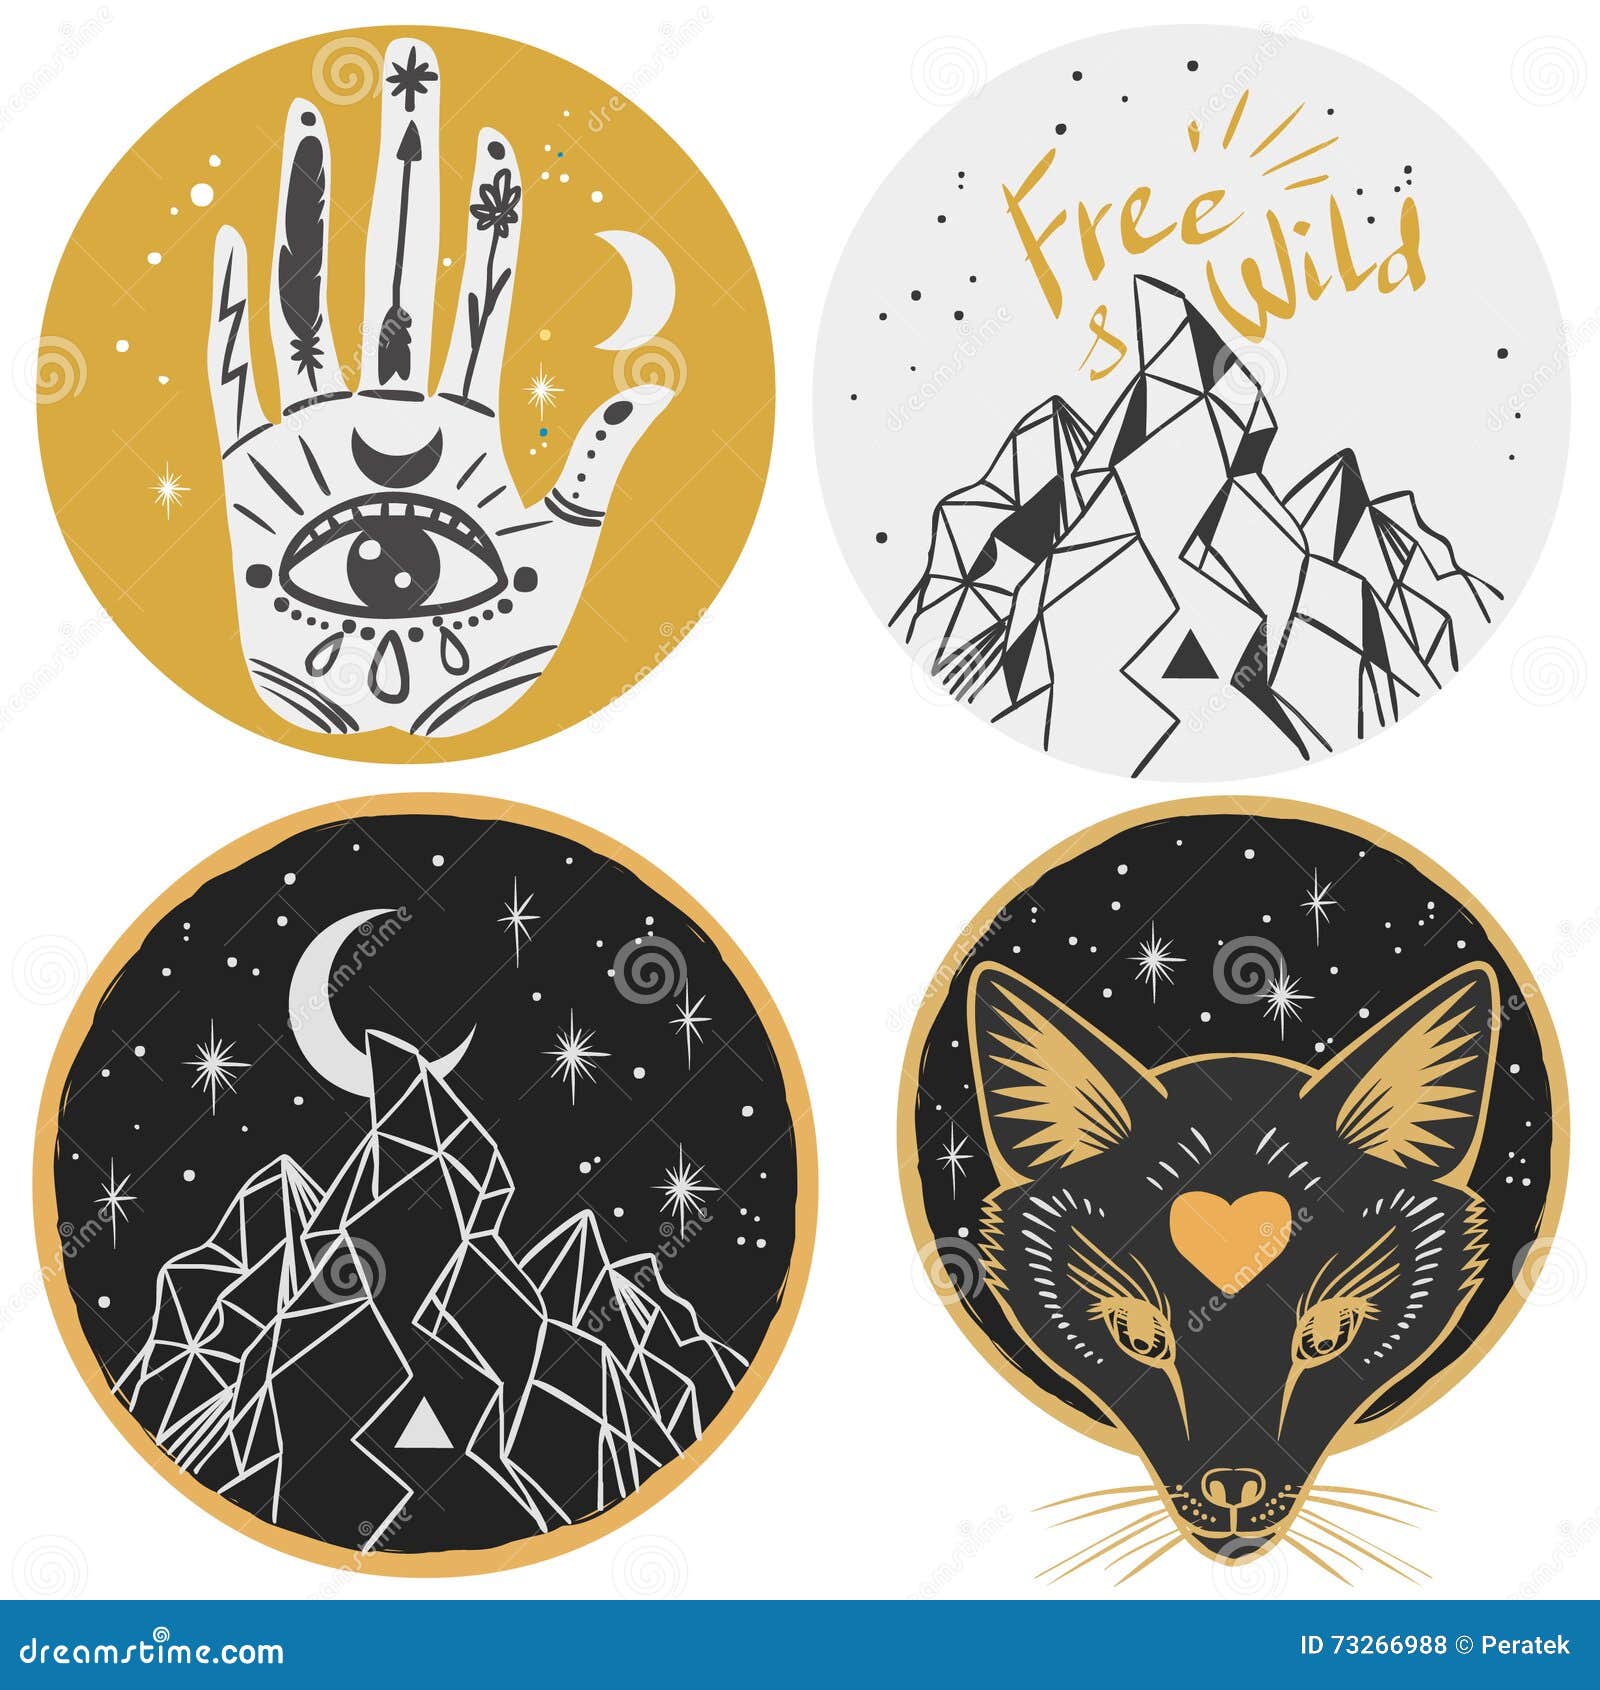 Round templates with mountains, fox head, hand, moon. Vector illustrations in boho style for stickers, t-shirt design and other